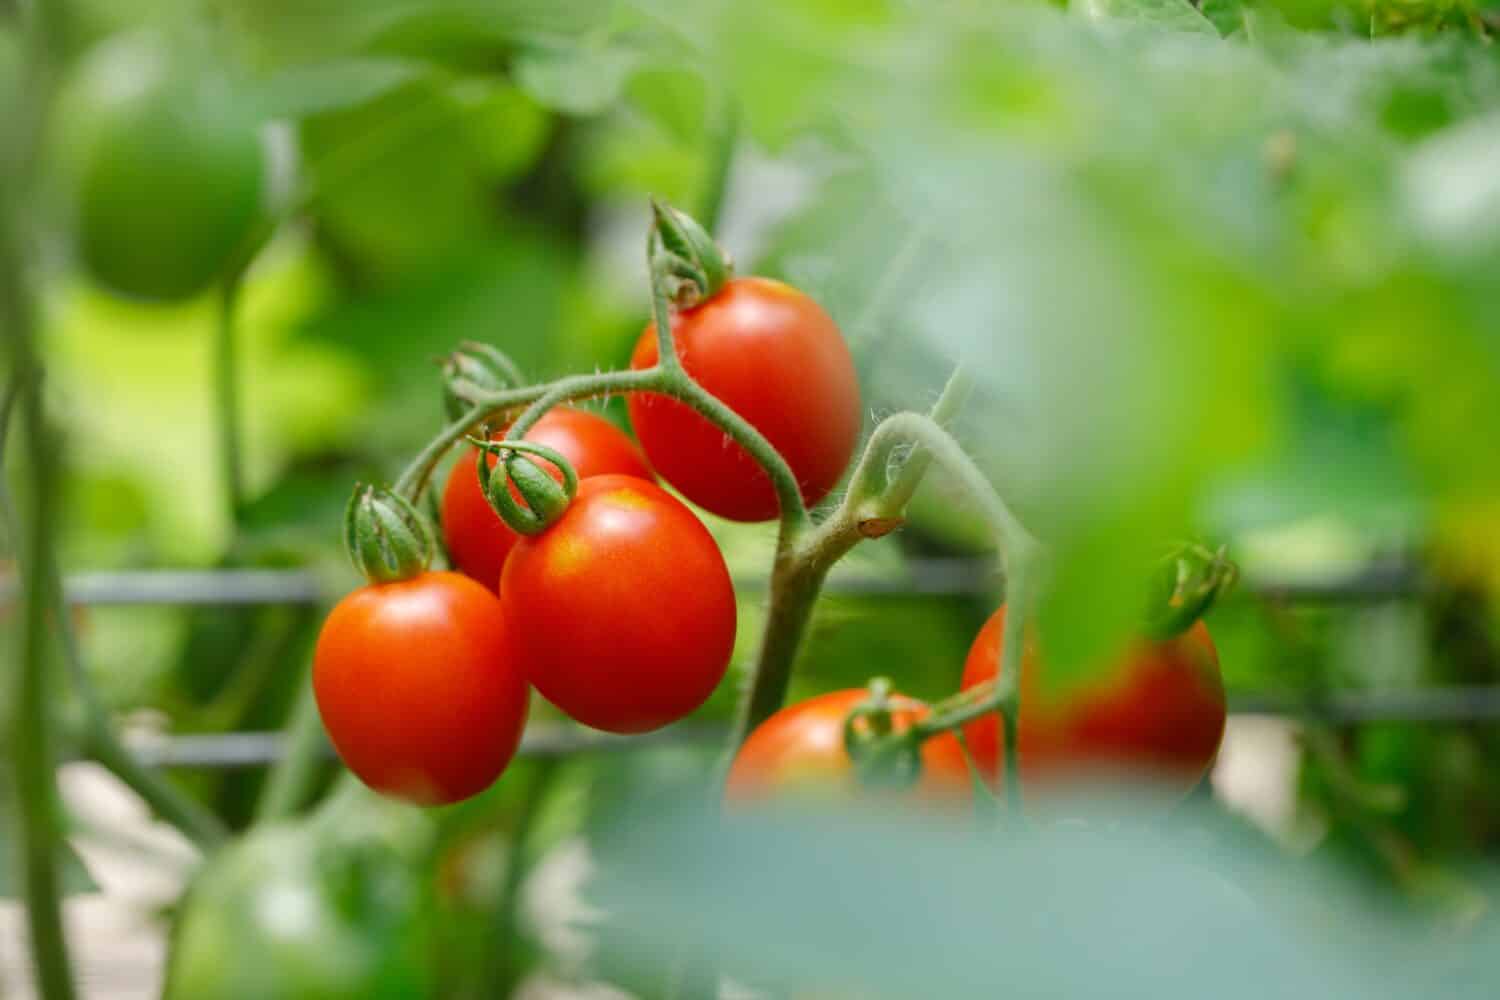 Grape Tomatoes - 'Principe Borghese' variety - growing on the vine in an organic home garden